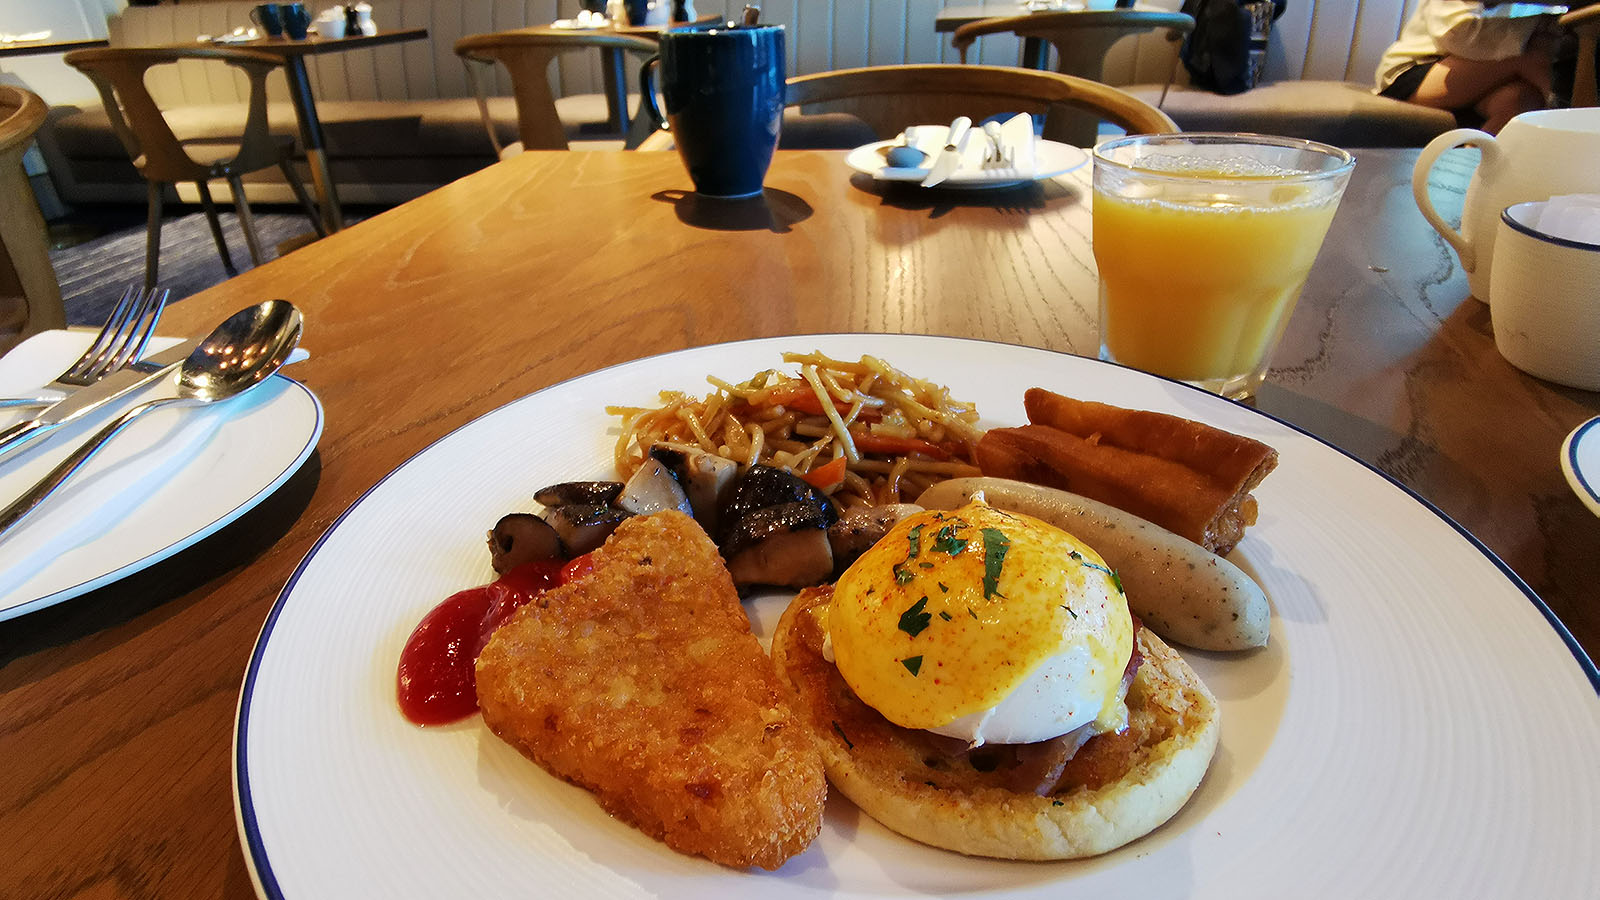 Breakfast plate at Hilton Singapore Orchard hotel